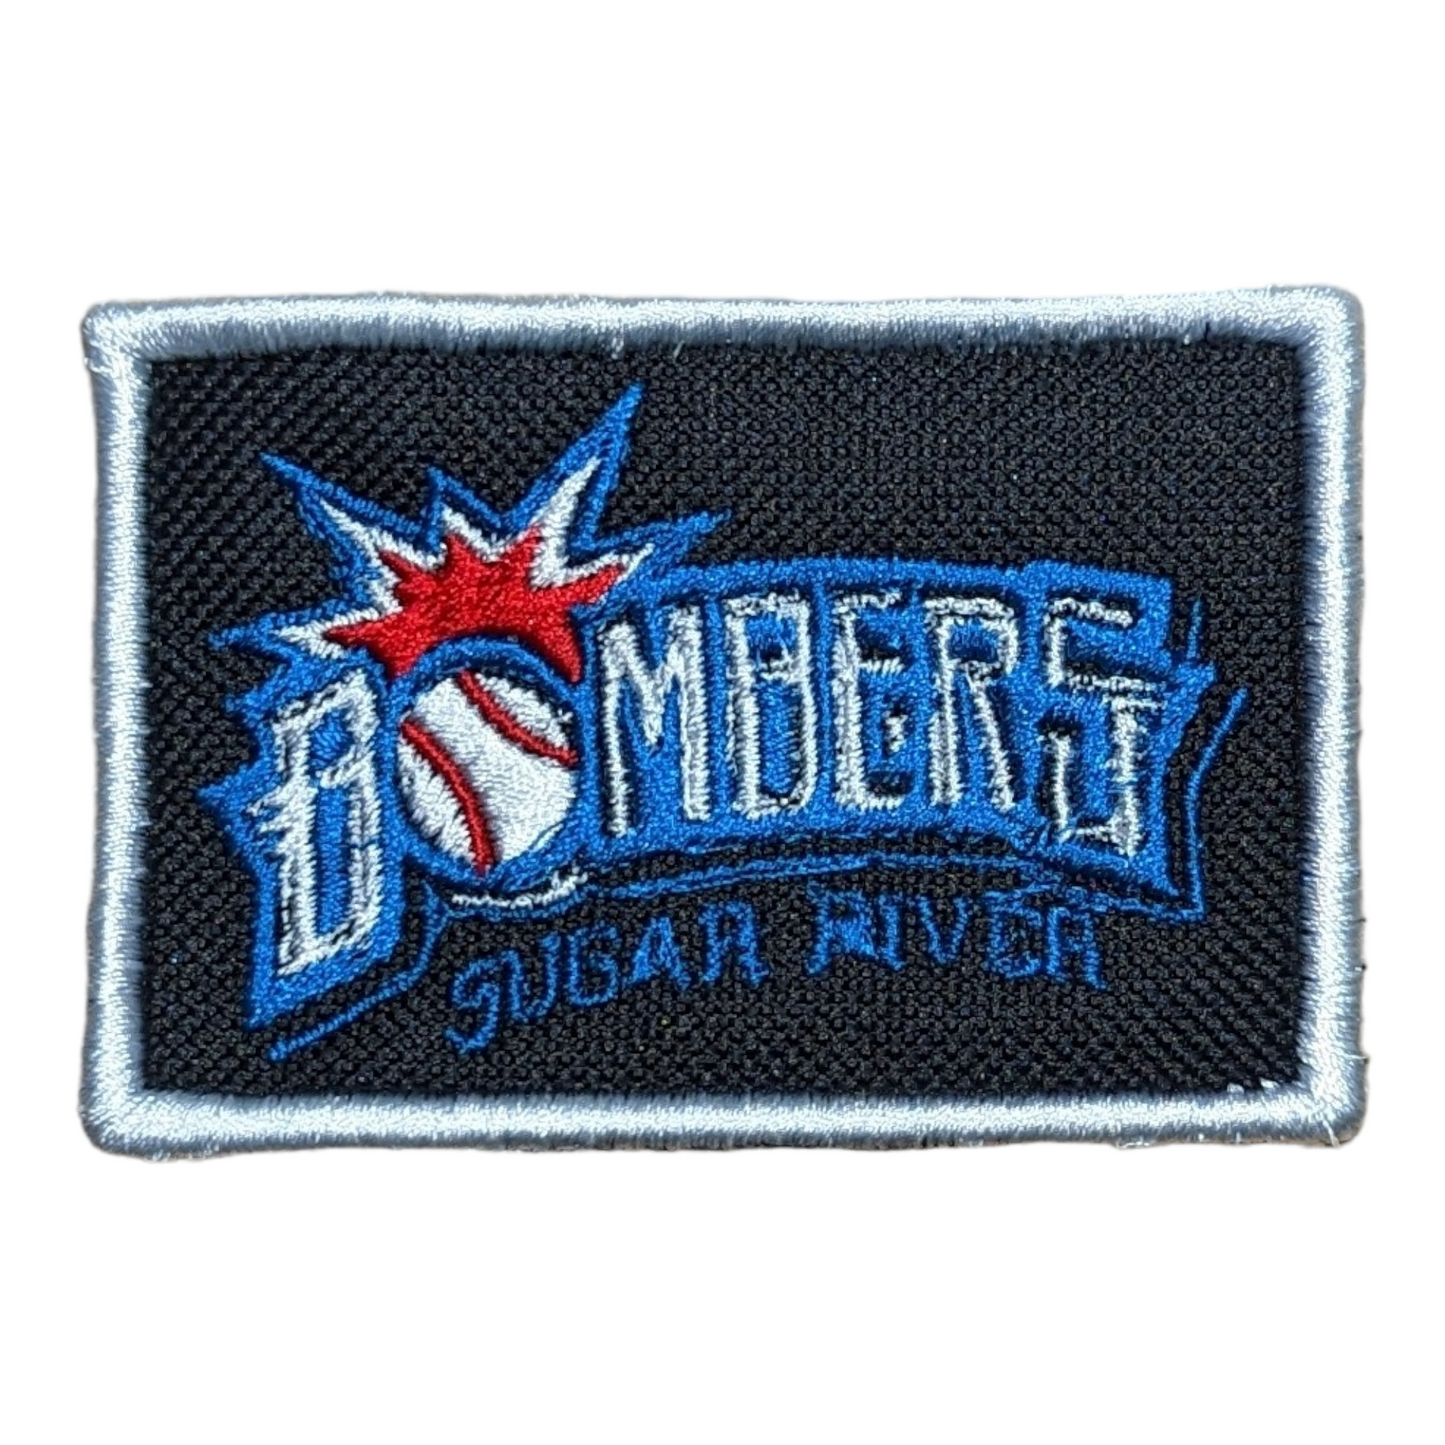 Sugar River Bombers Patch